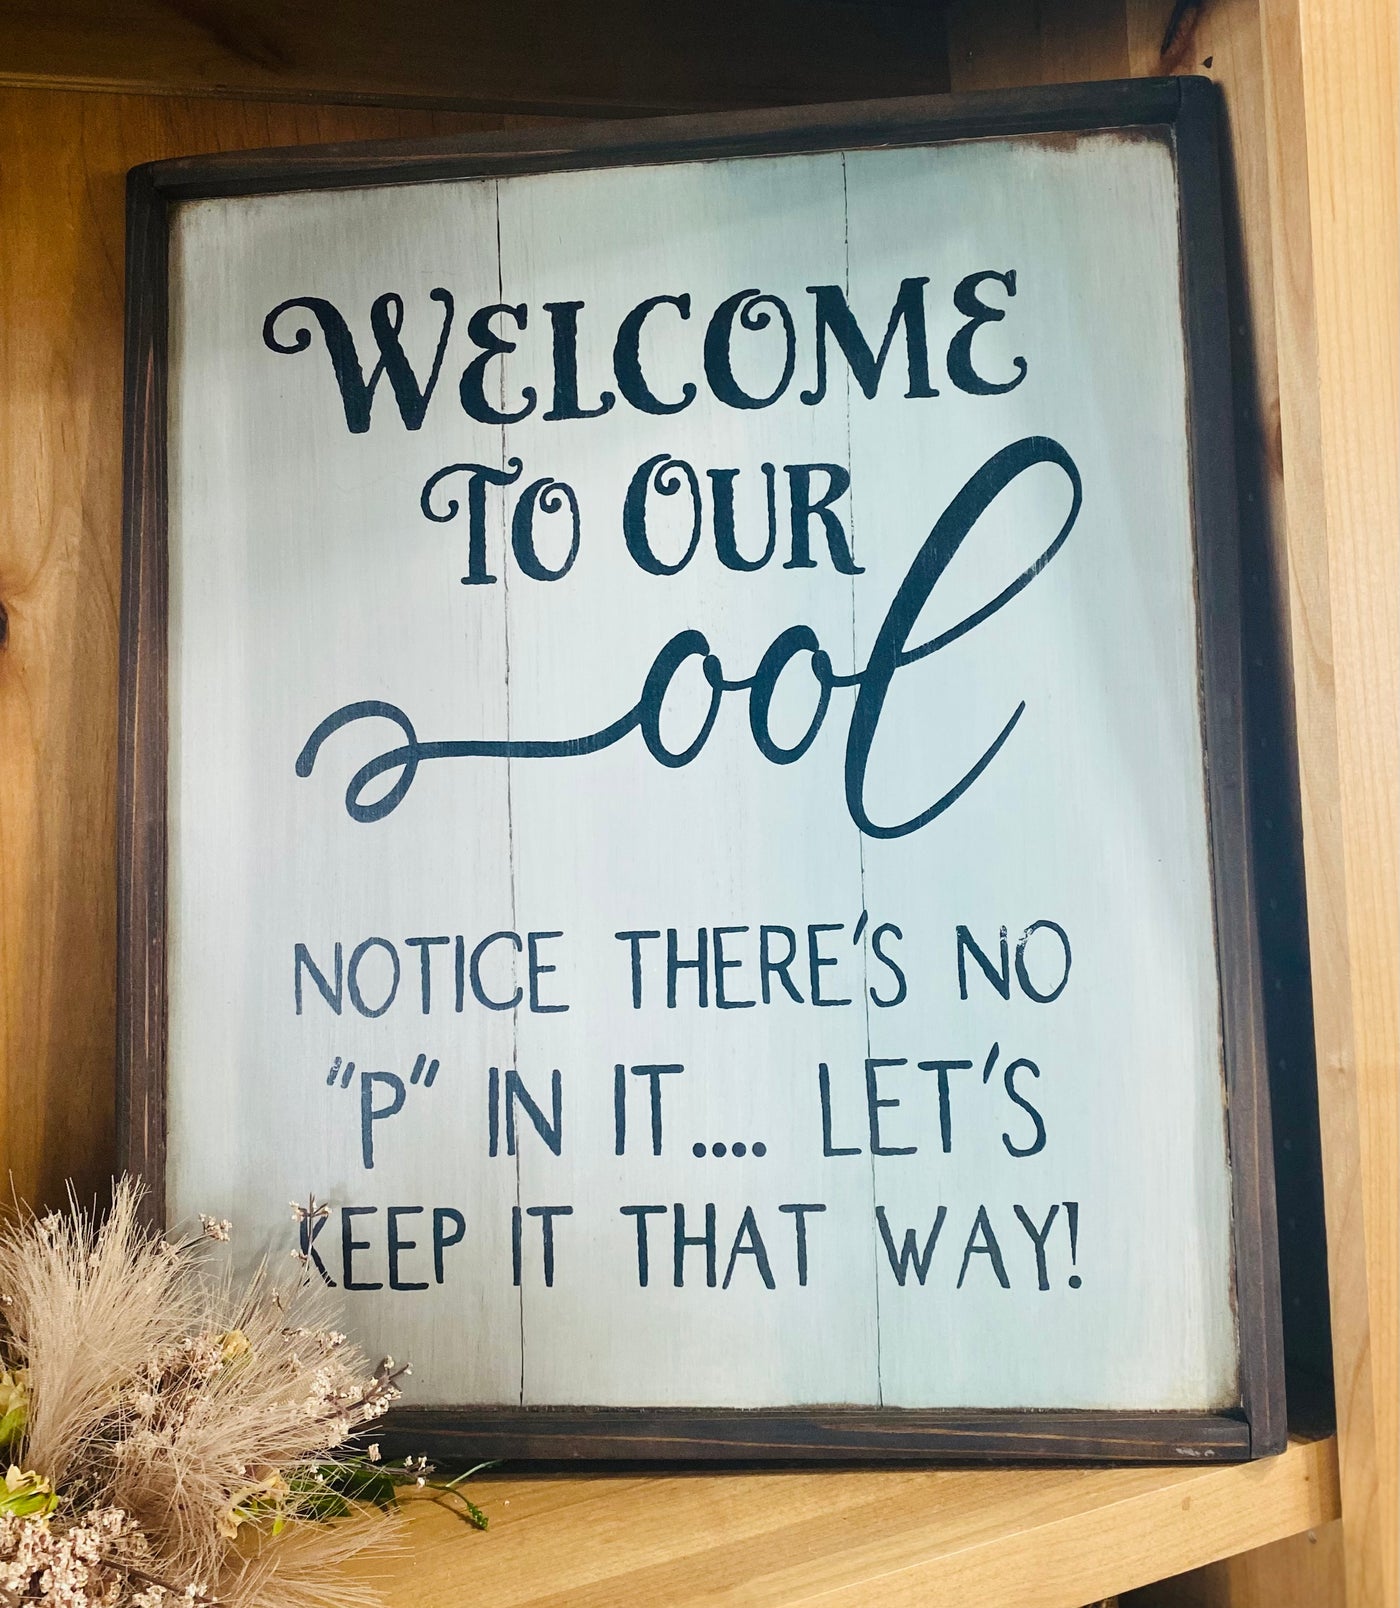 Hand painted wood sign reads Welcome to our ool. Notice there’s no P in it… let’s keep it that way!